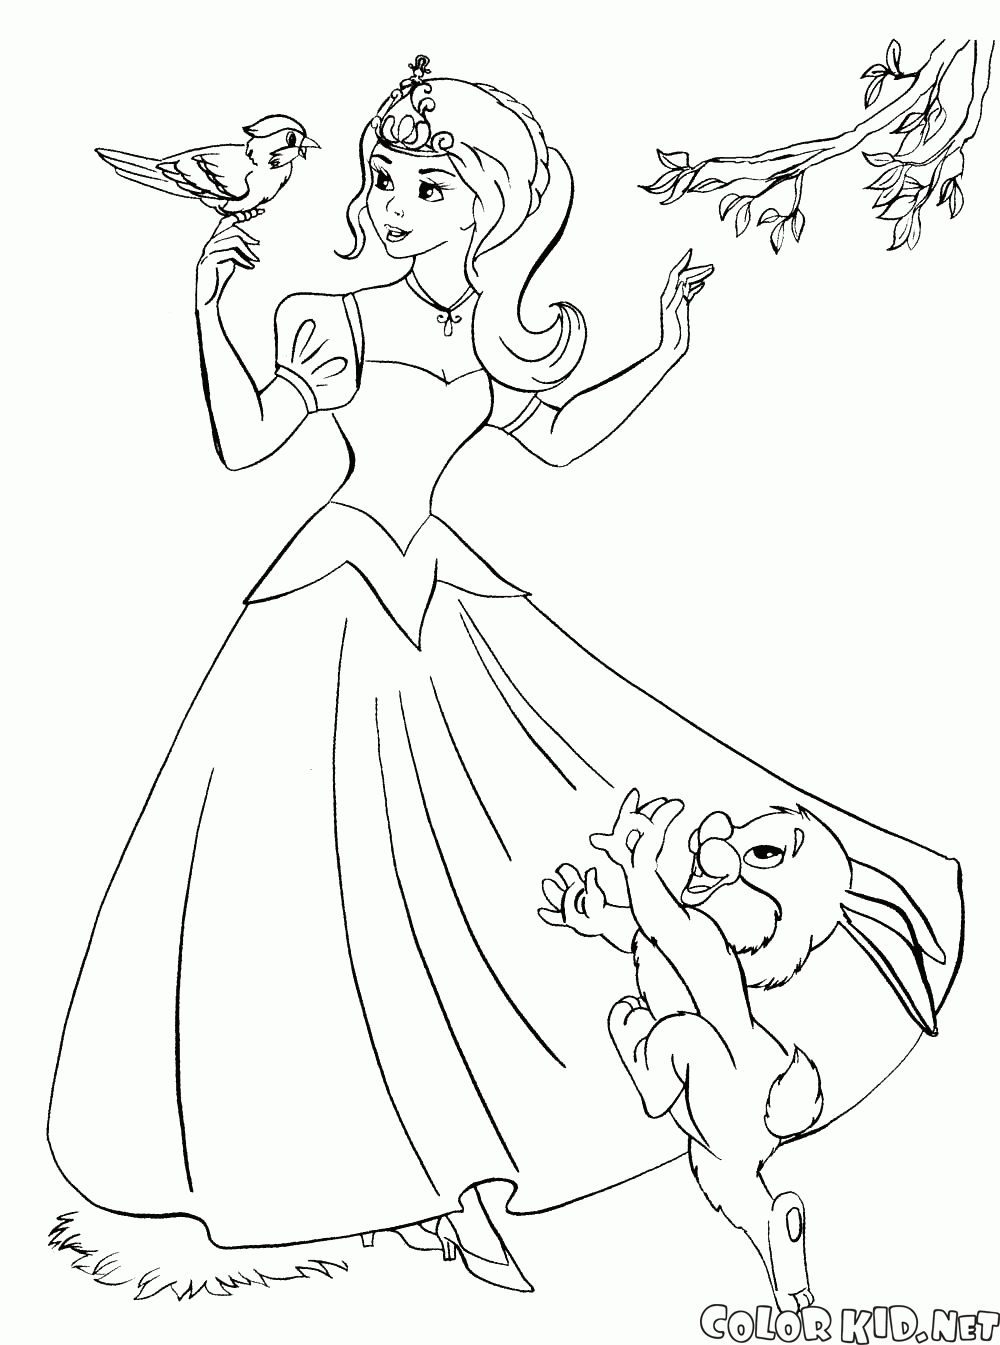 Get Good Princess Coloring Pages Gif | Coloring Pages